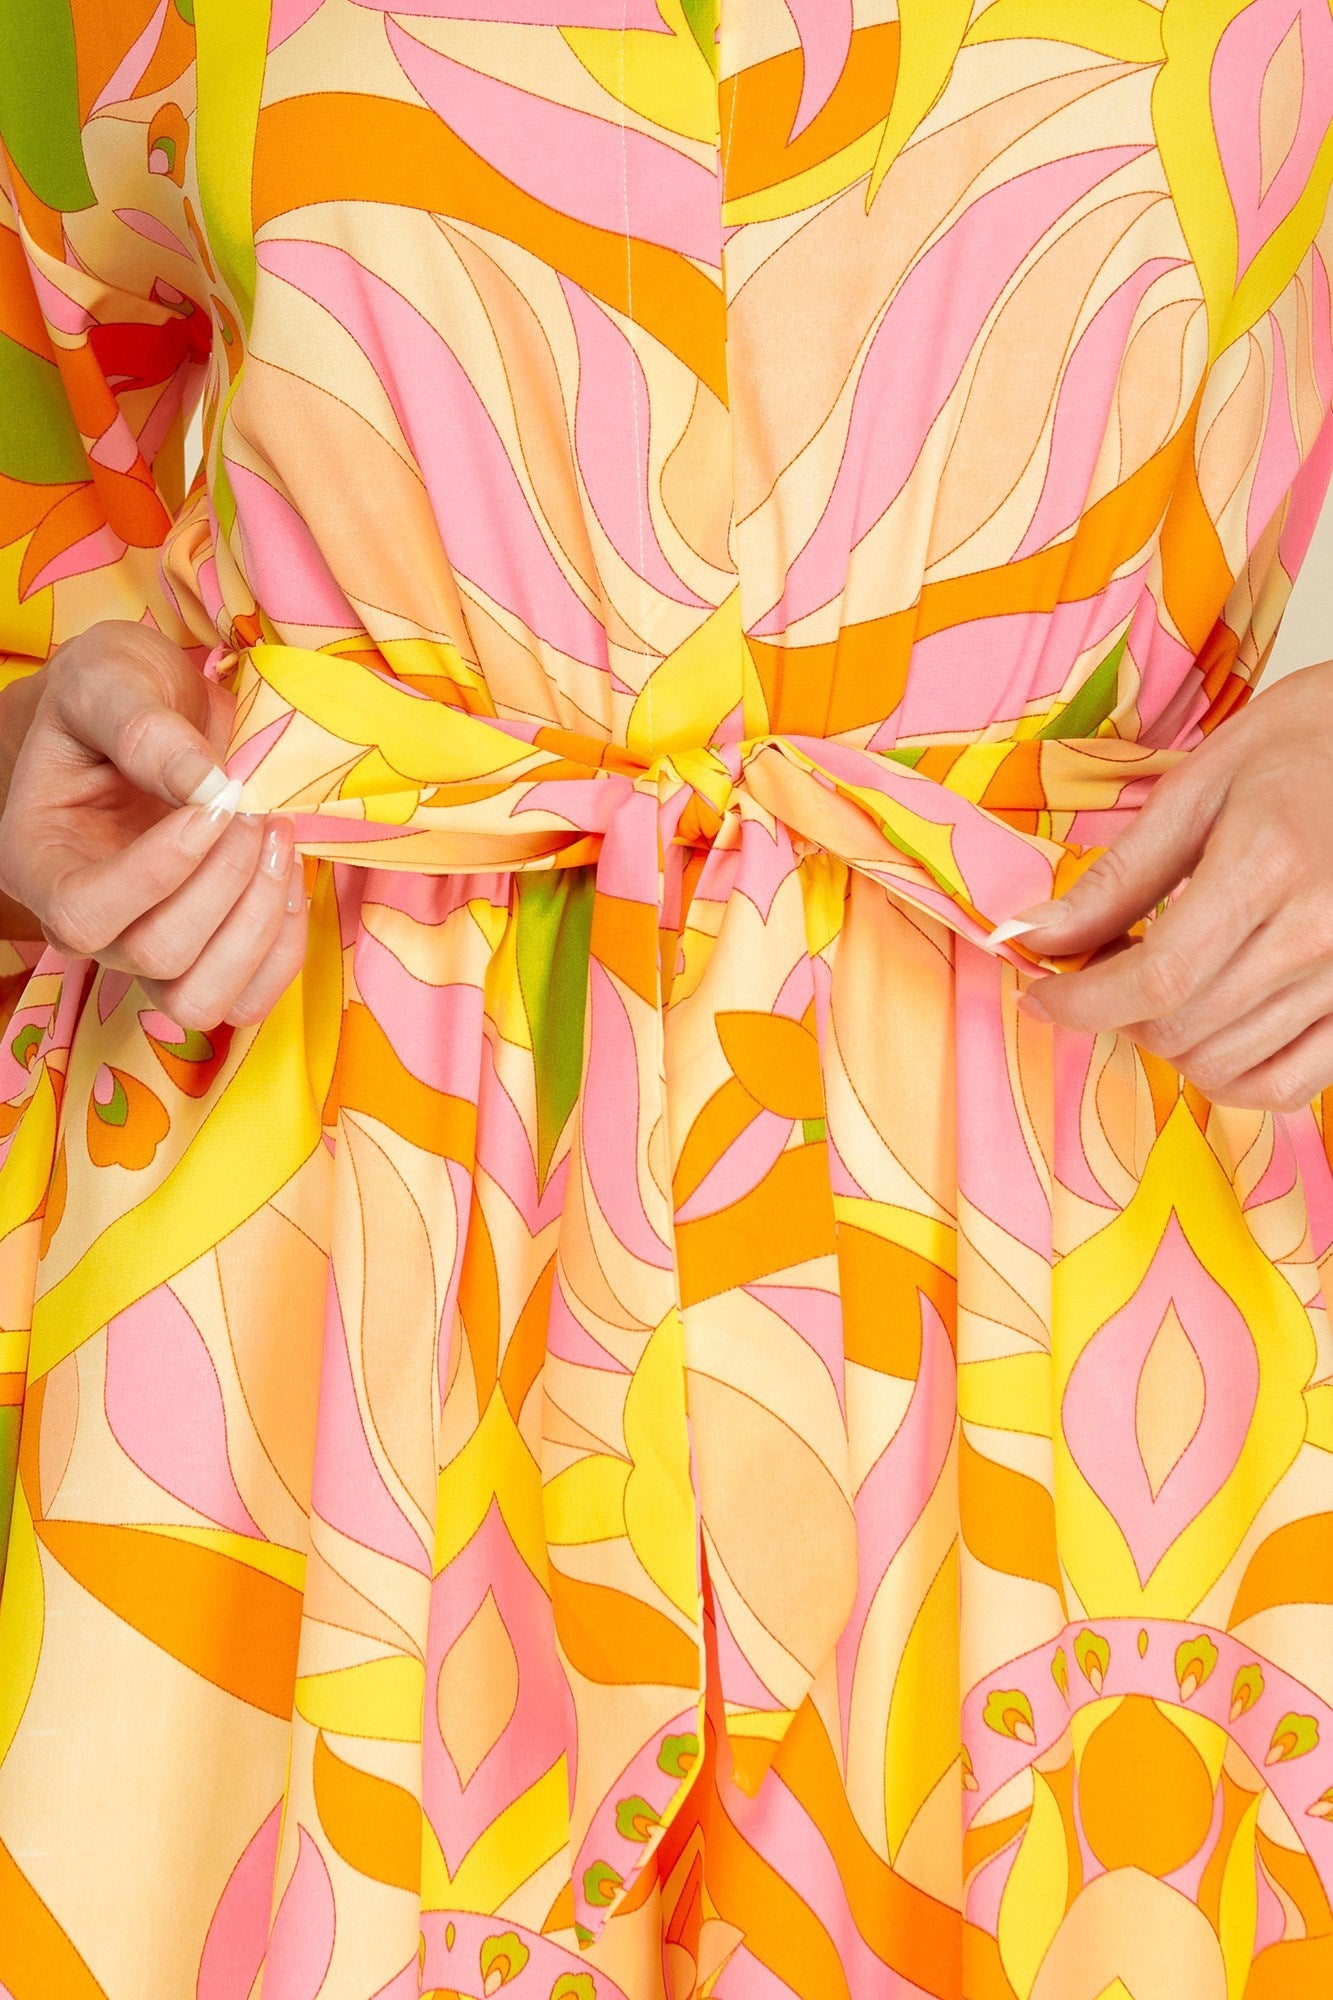 Orange and Yellow Abstract Collared Romper